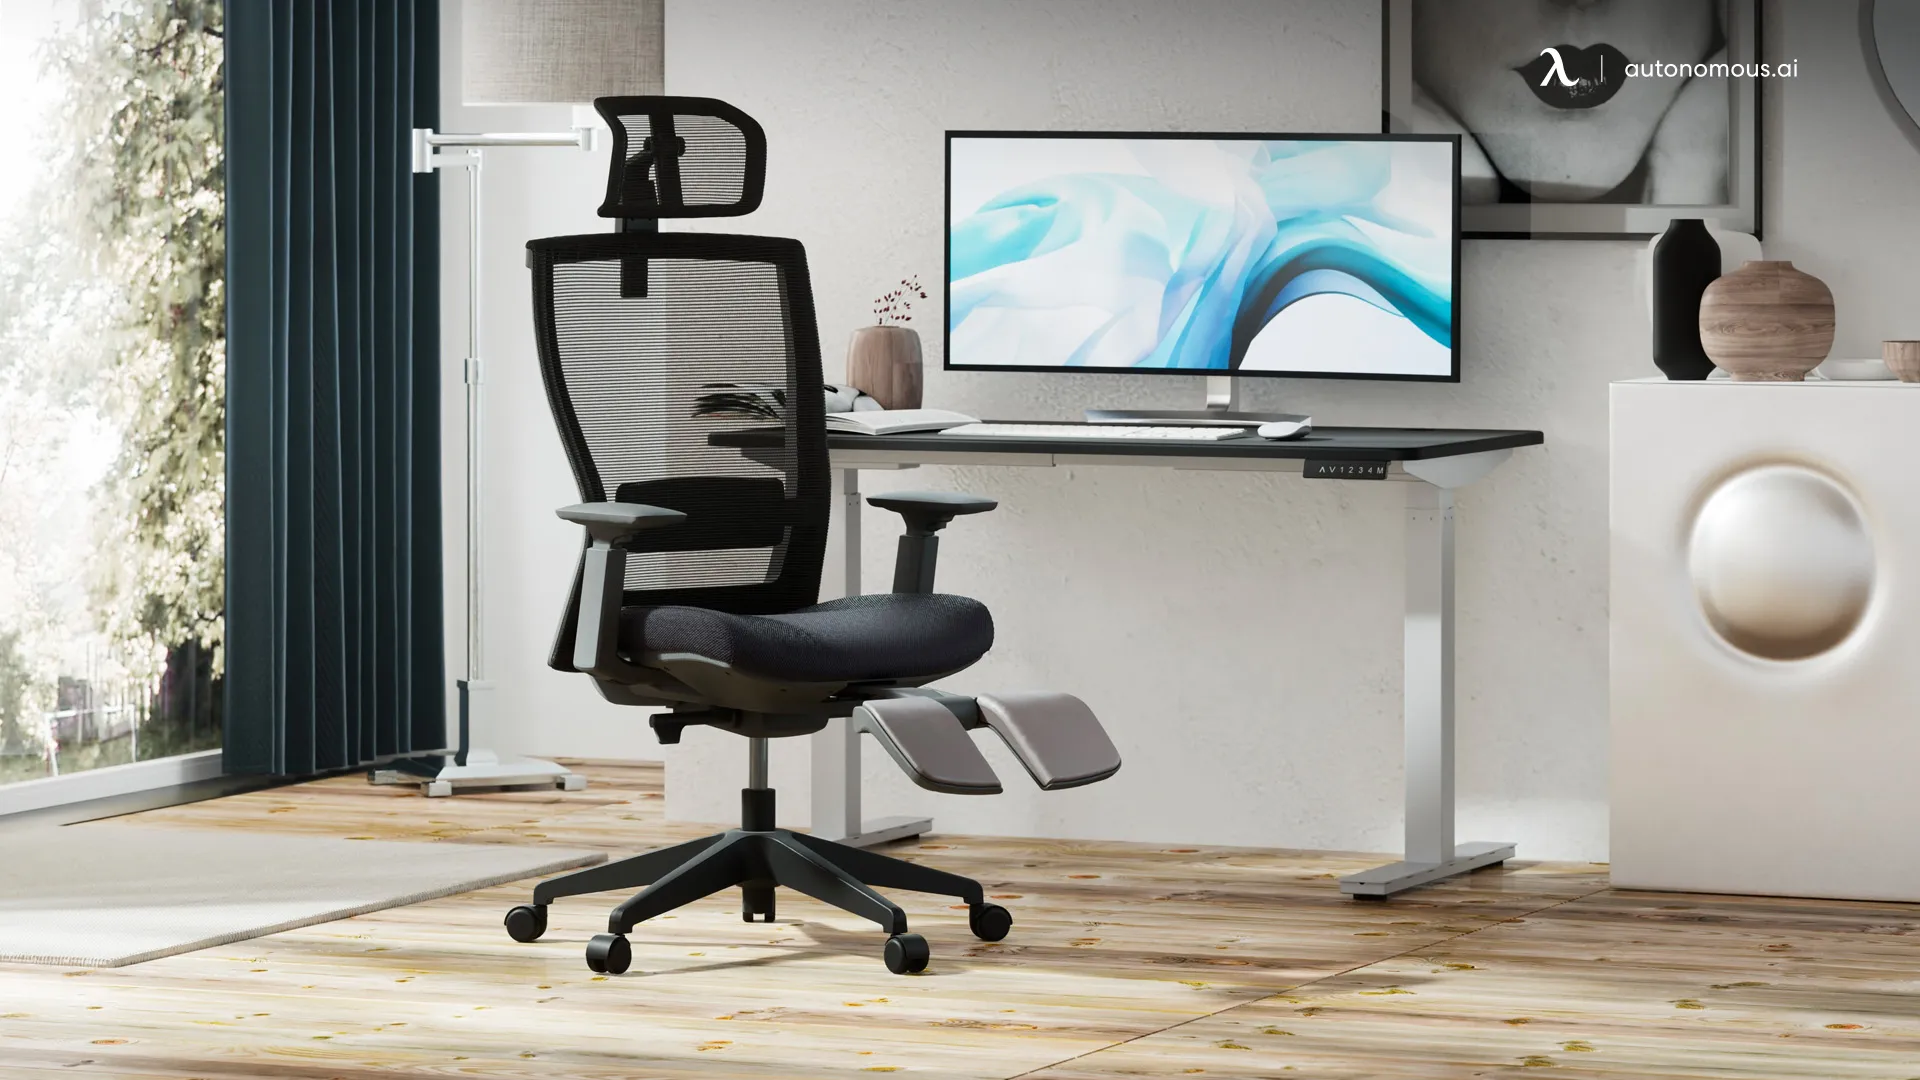 How to Buy a Chair for Office Use at the Best Price?